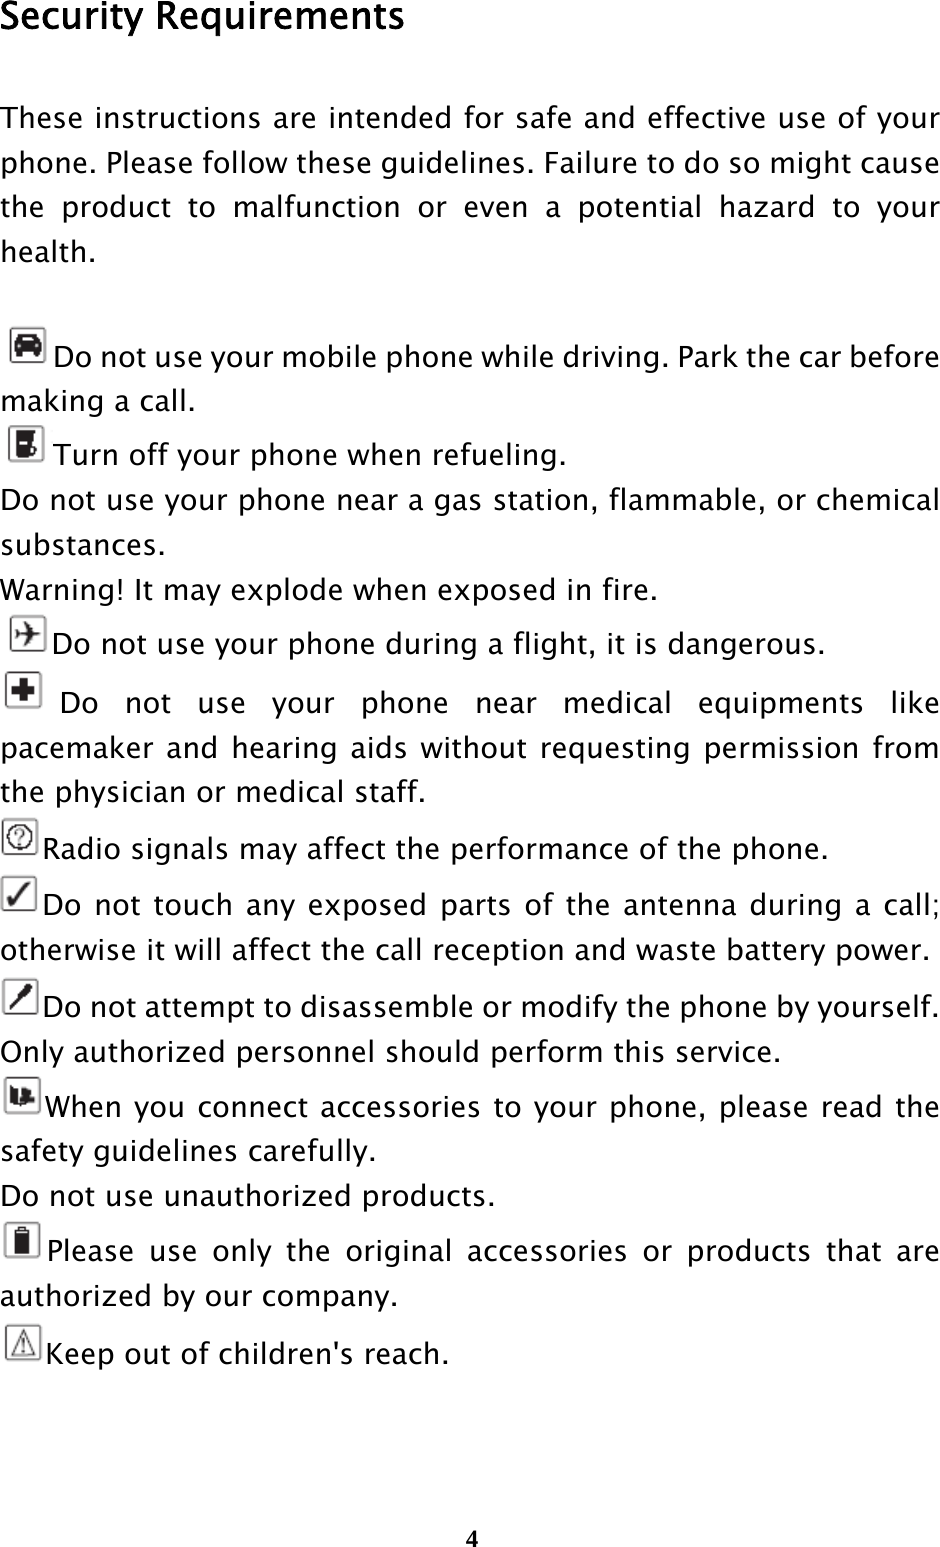  4Security Requirements These instructions are intended for safe and effective use of your phone. Please follow these guidelines. Failure to do so might cause the product to malfunction or even a potential hazard to your health.  Do not use your mobile phone while driving. Park the car before making a call. Turn off your phone when refueling. Do not use your phone near a gas station, flammable, or chemical substances.  Warning! It may explode when exposed in fire. Do not use your phone during a flight, it is dangerous. Do not use your phone near medical equipments like pacemaker and hearing aids without requesting permission from the physician or medical staff. Radio signals may affect the performance of the phone. Do not touch any exposed parts of the antenna during a call; otherwise it will affect the call reception and waste battery power. Do not attempt to disassemble or modify the phone by yourself. Only authorized personnel should perform this service. When you connect accessories to your phone, please read the safety guidelines carefully. Do not use unauthorized products. Please use only the original accessories or products that are authorized by our company. Keep out of children&apos;s reach.  